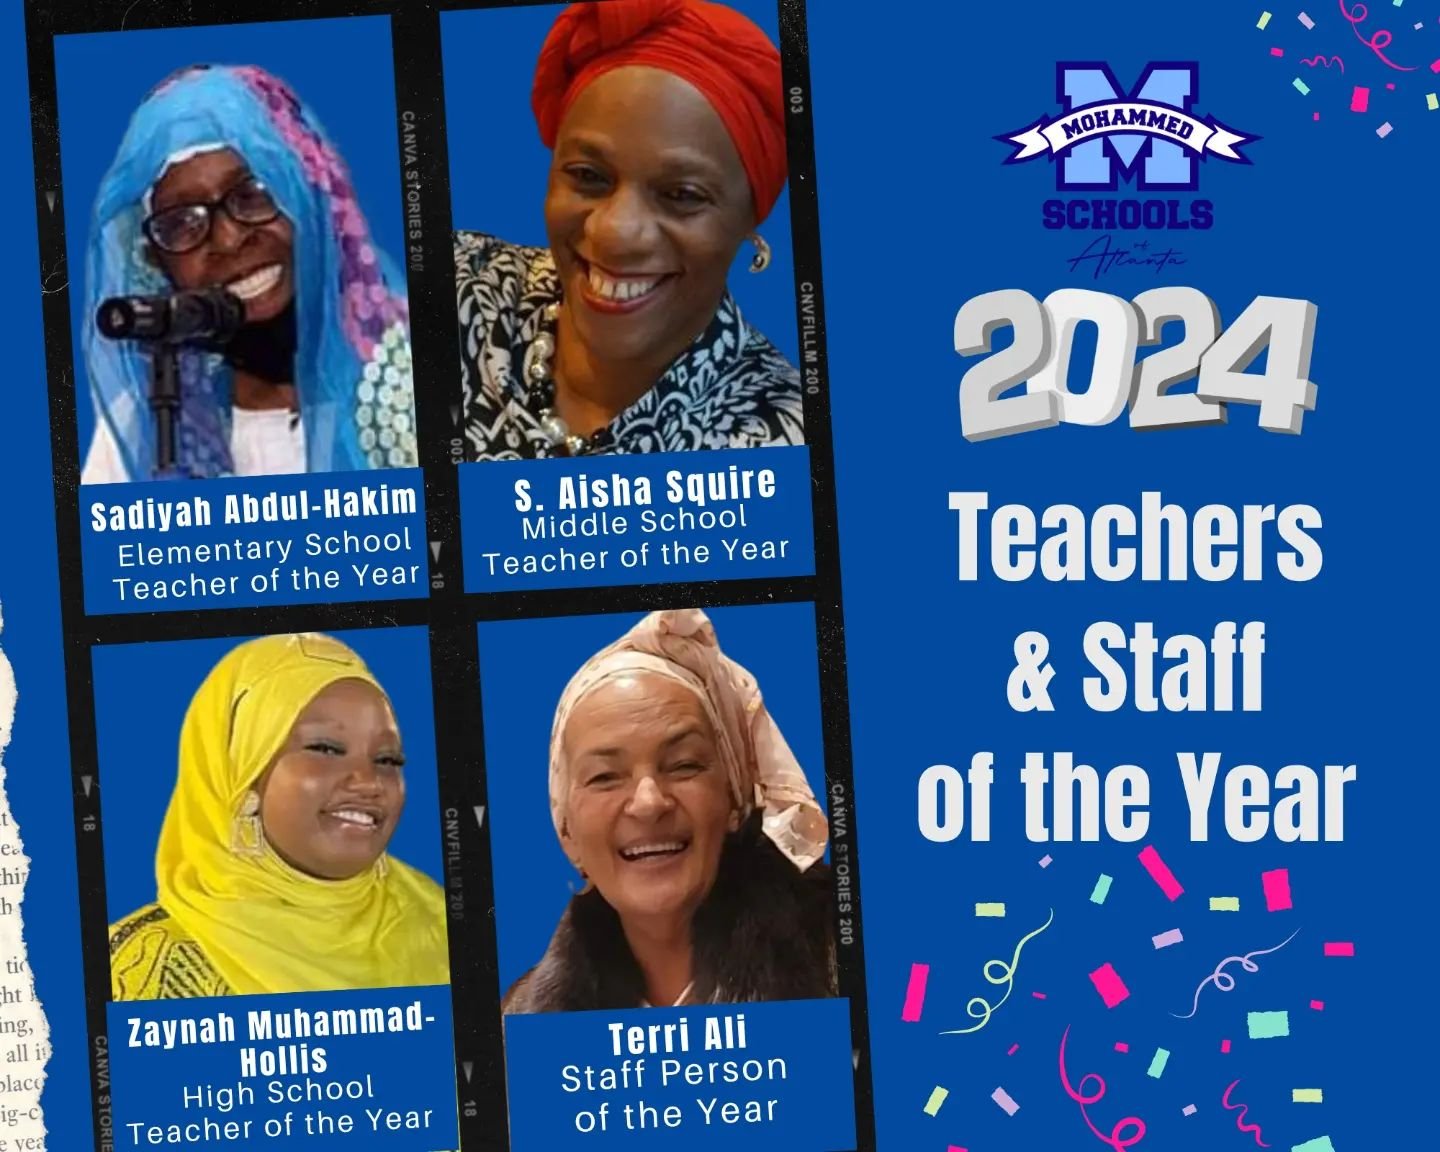 With great honor, we applaud our Teachers of the Year and Staff Person of the Year. You set a high bar of excellence  love of students, and consistency.  Thank you.